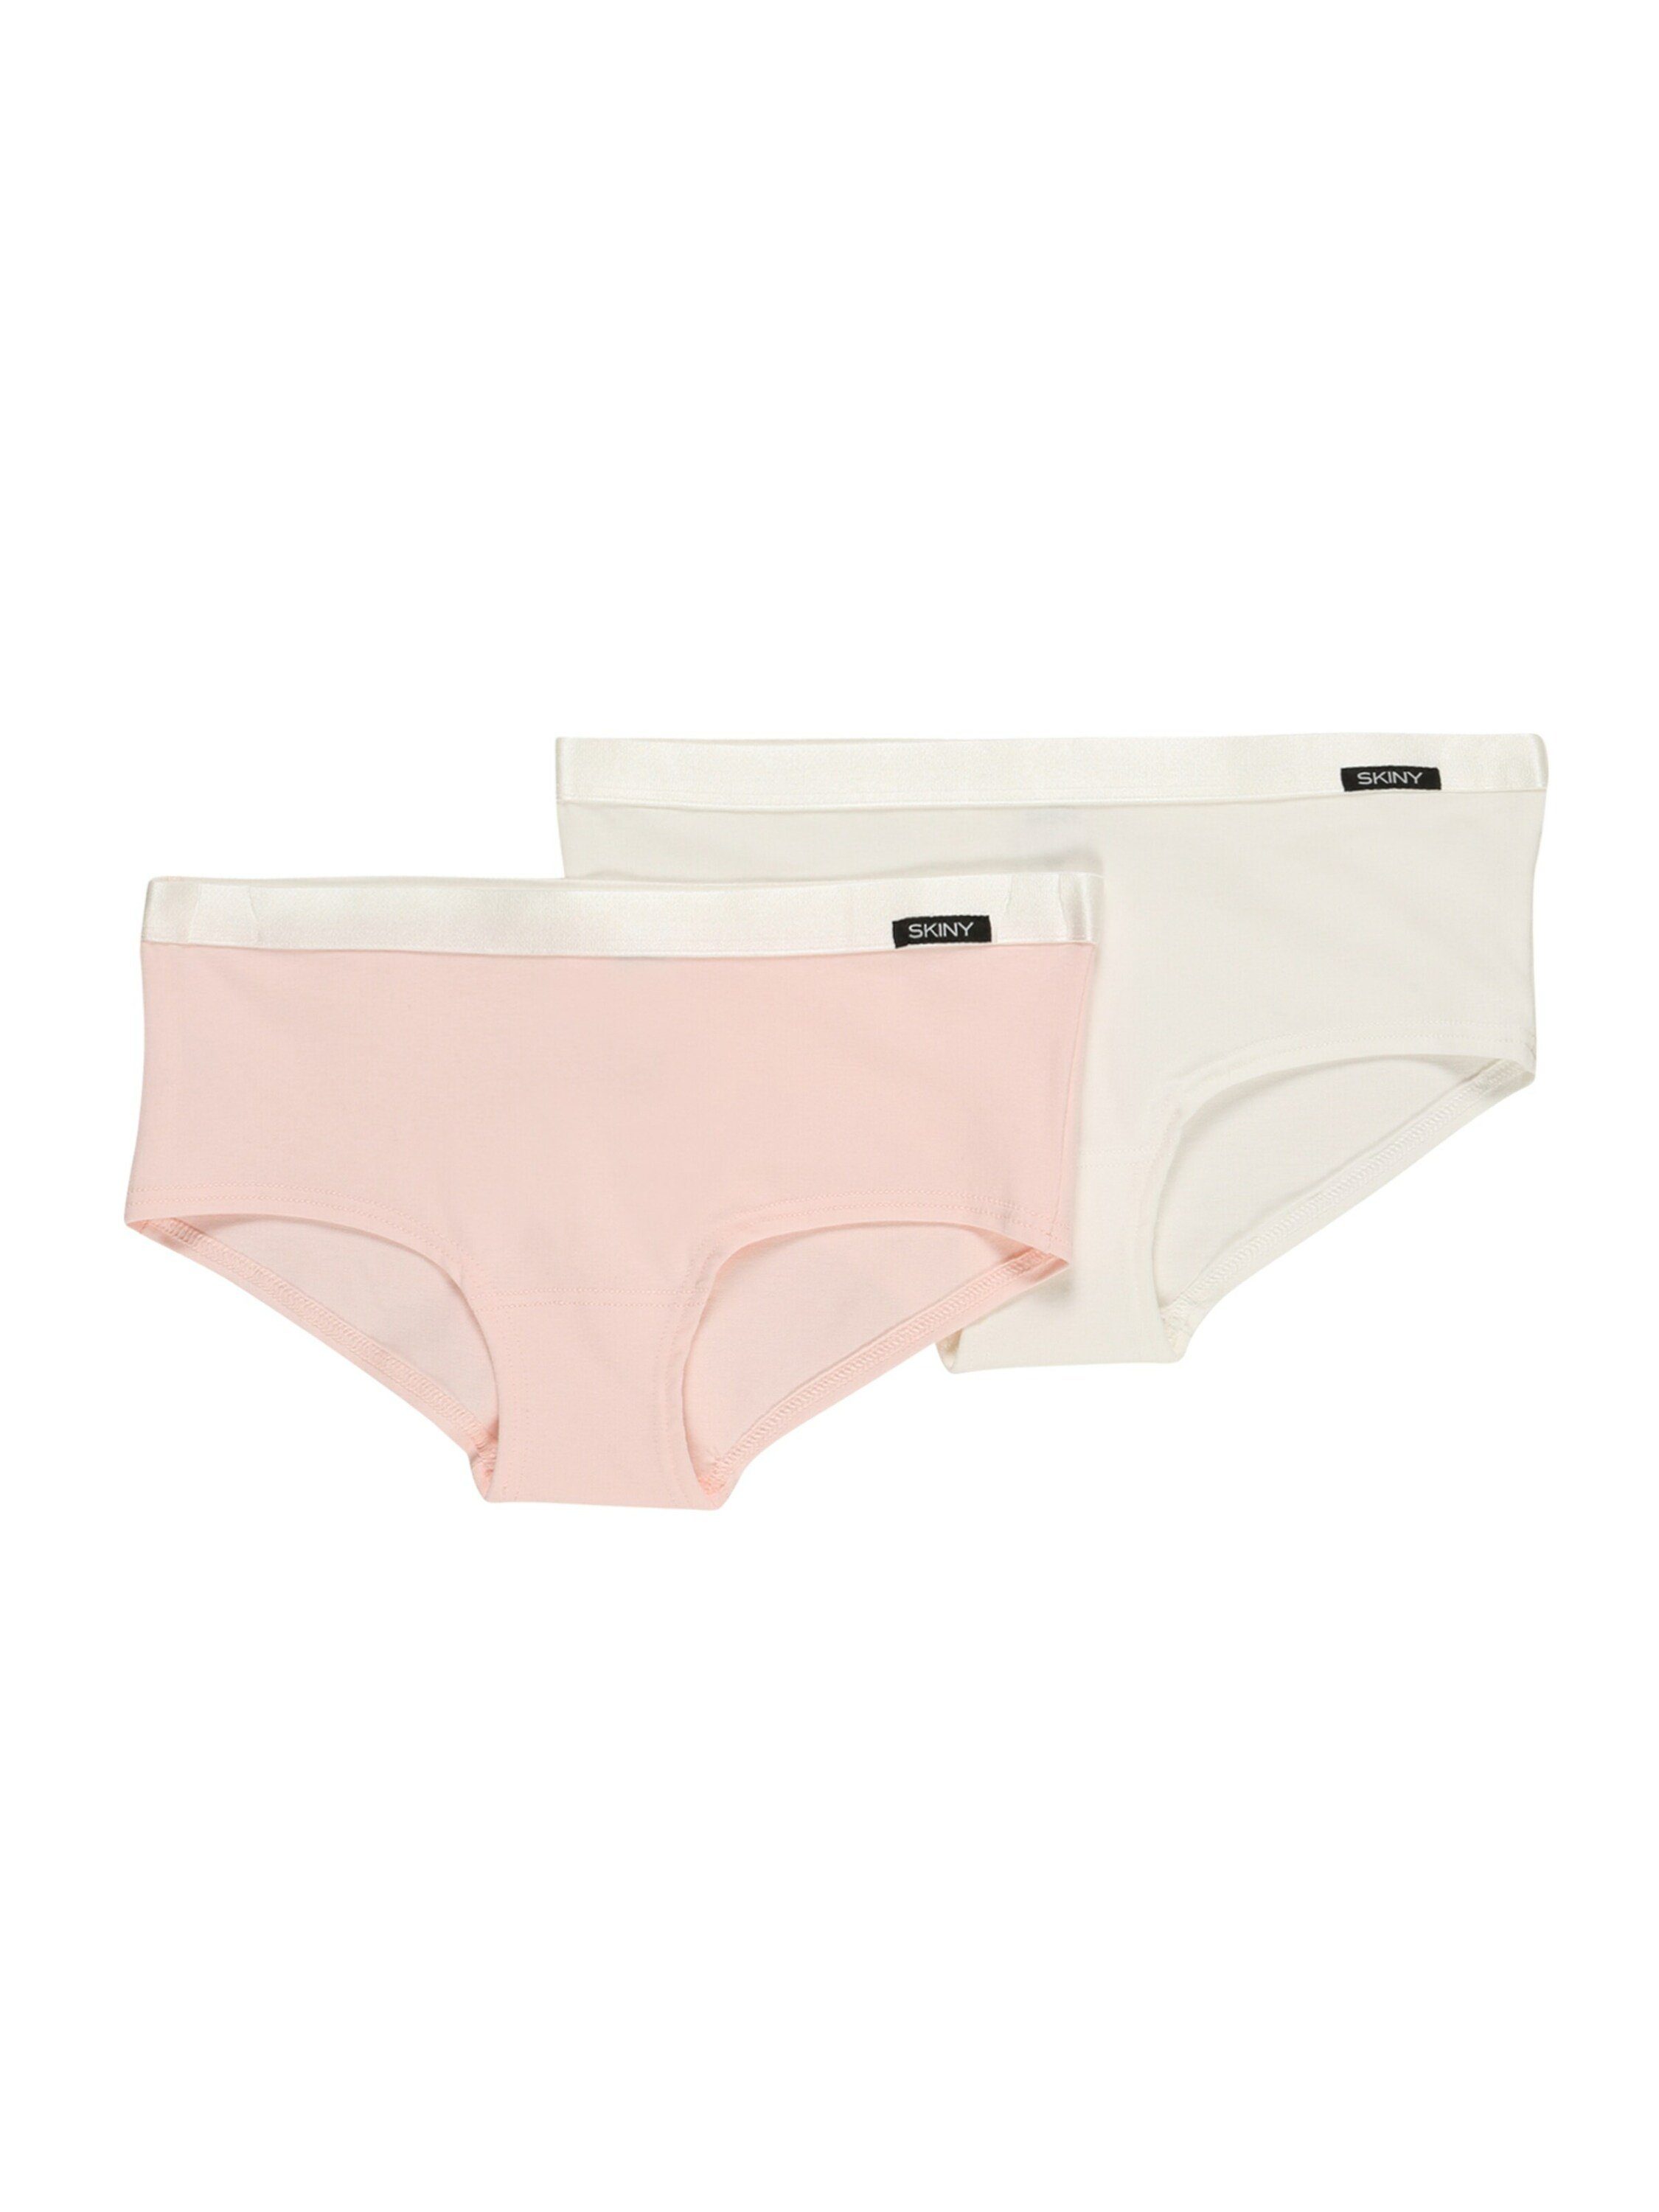 Skiny Panty (2-St) Weiteres Detail Rosa/Beige